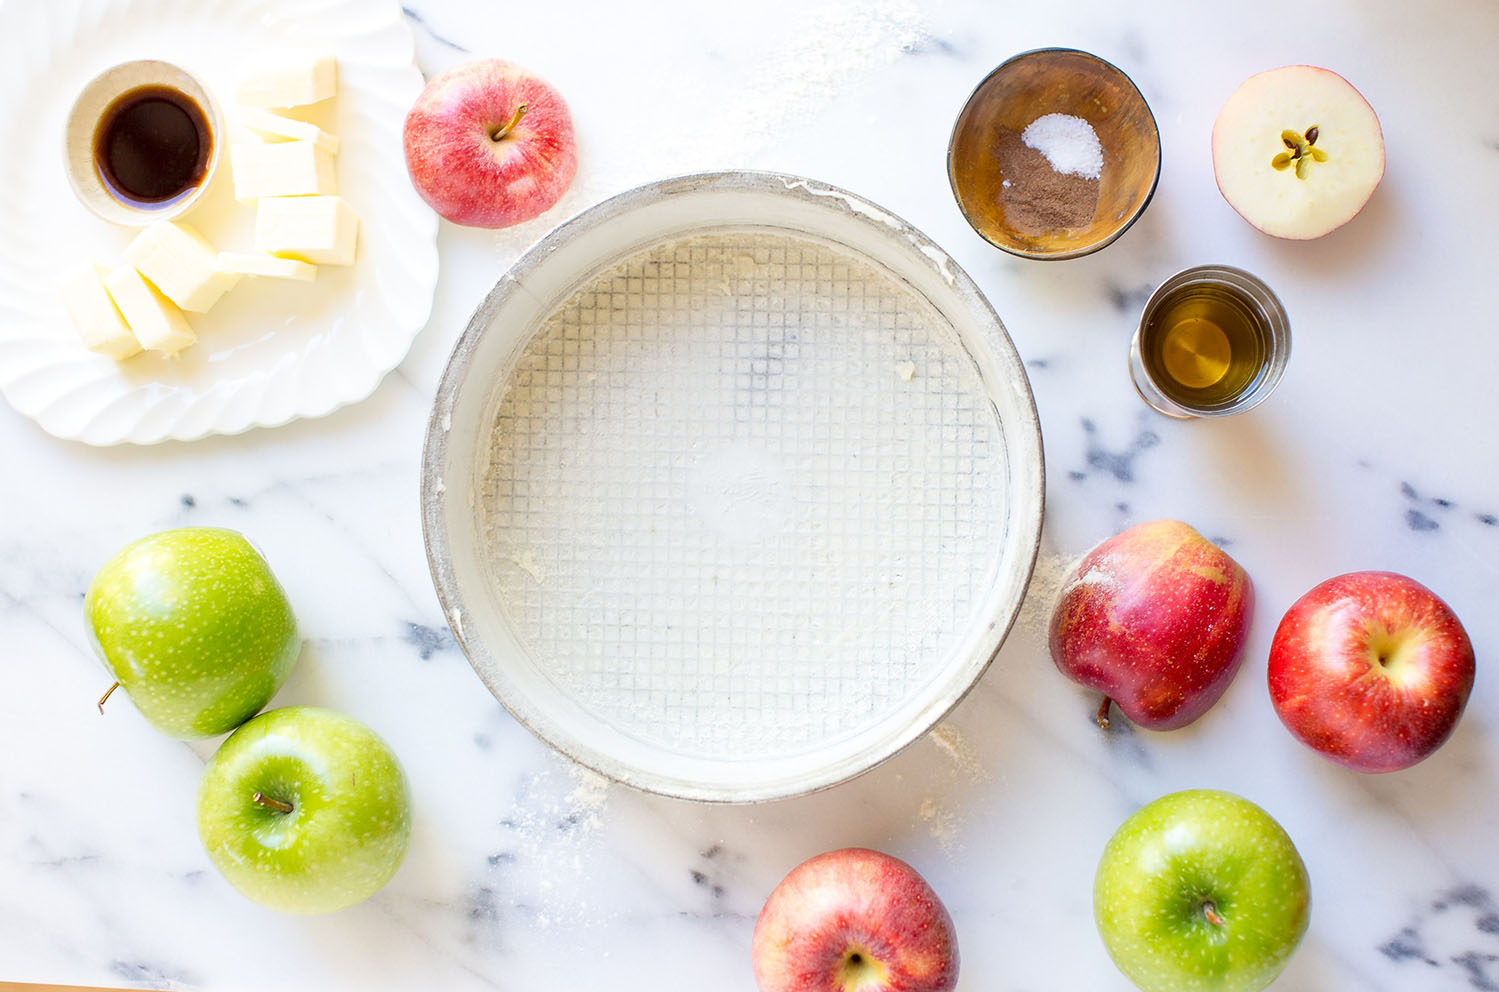 French Apple Cake ingredients